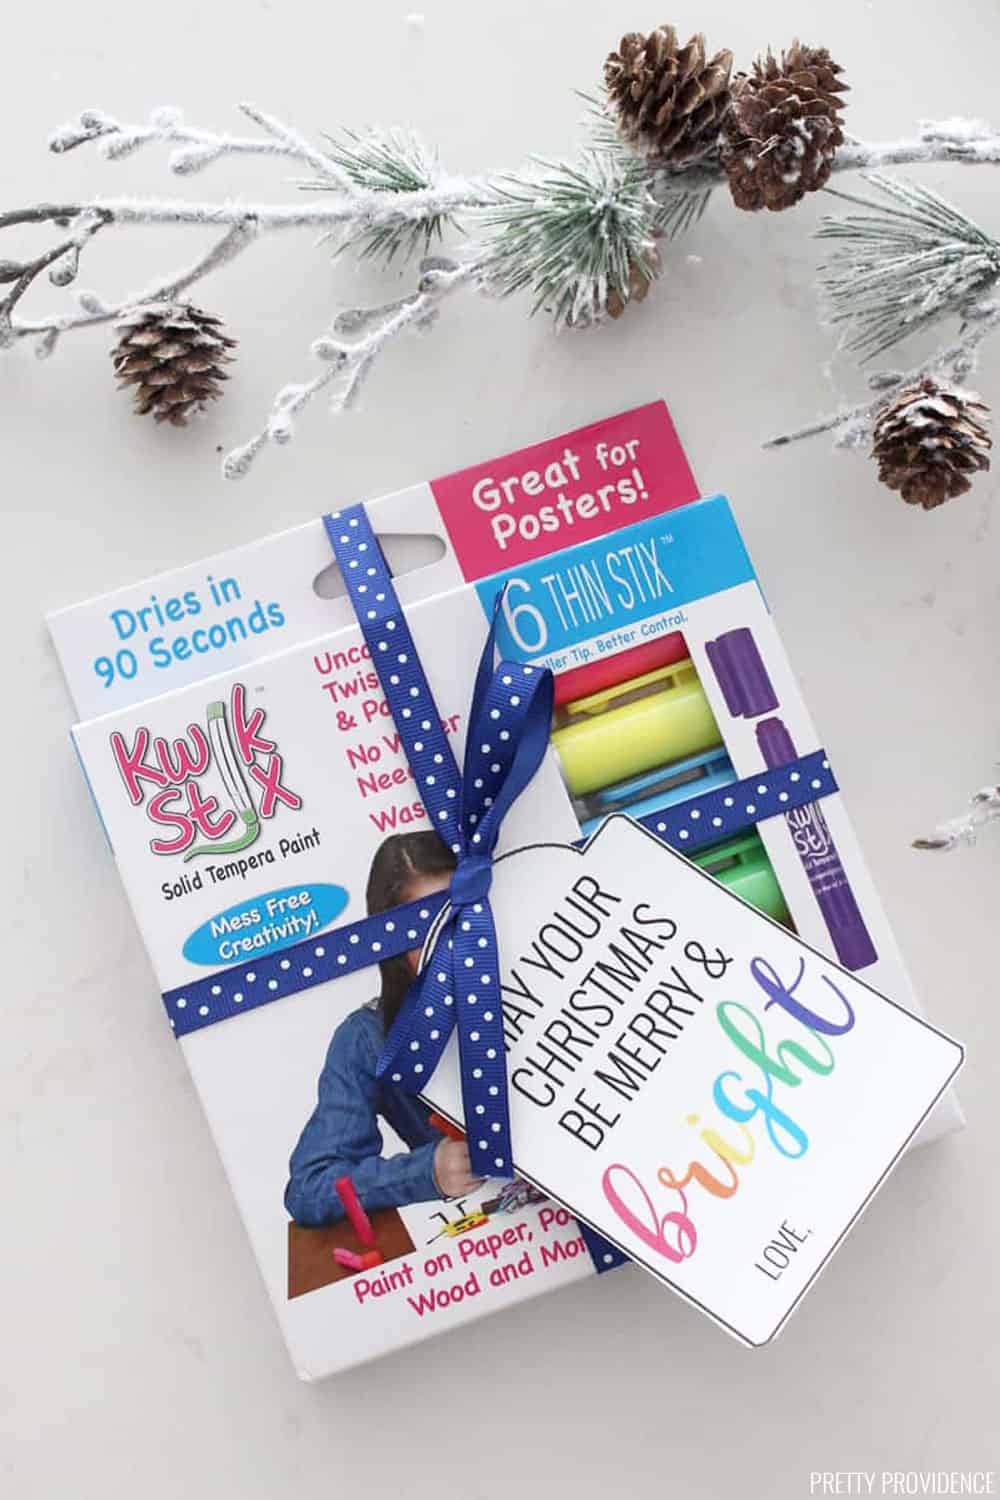 I love these fun Merry and Bright Christmas gift tags! Such a fun gift for a teacher or friend! 